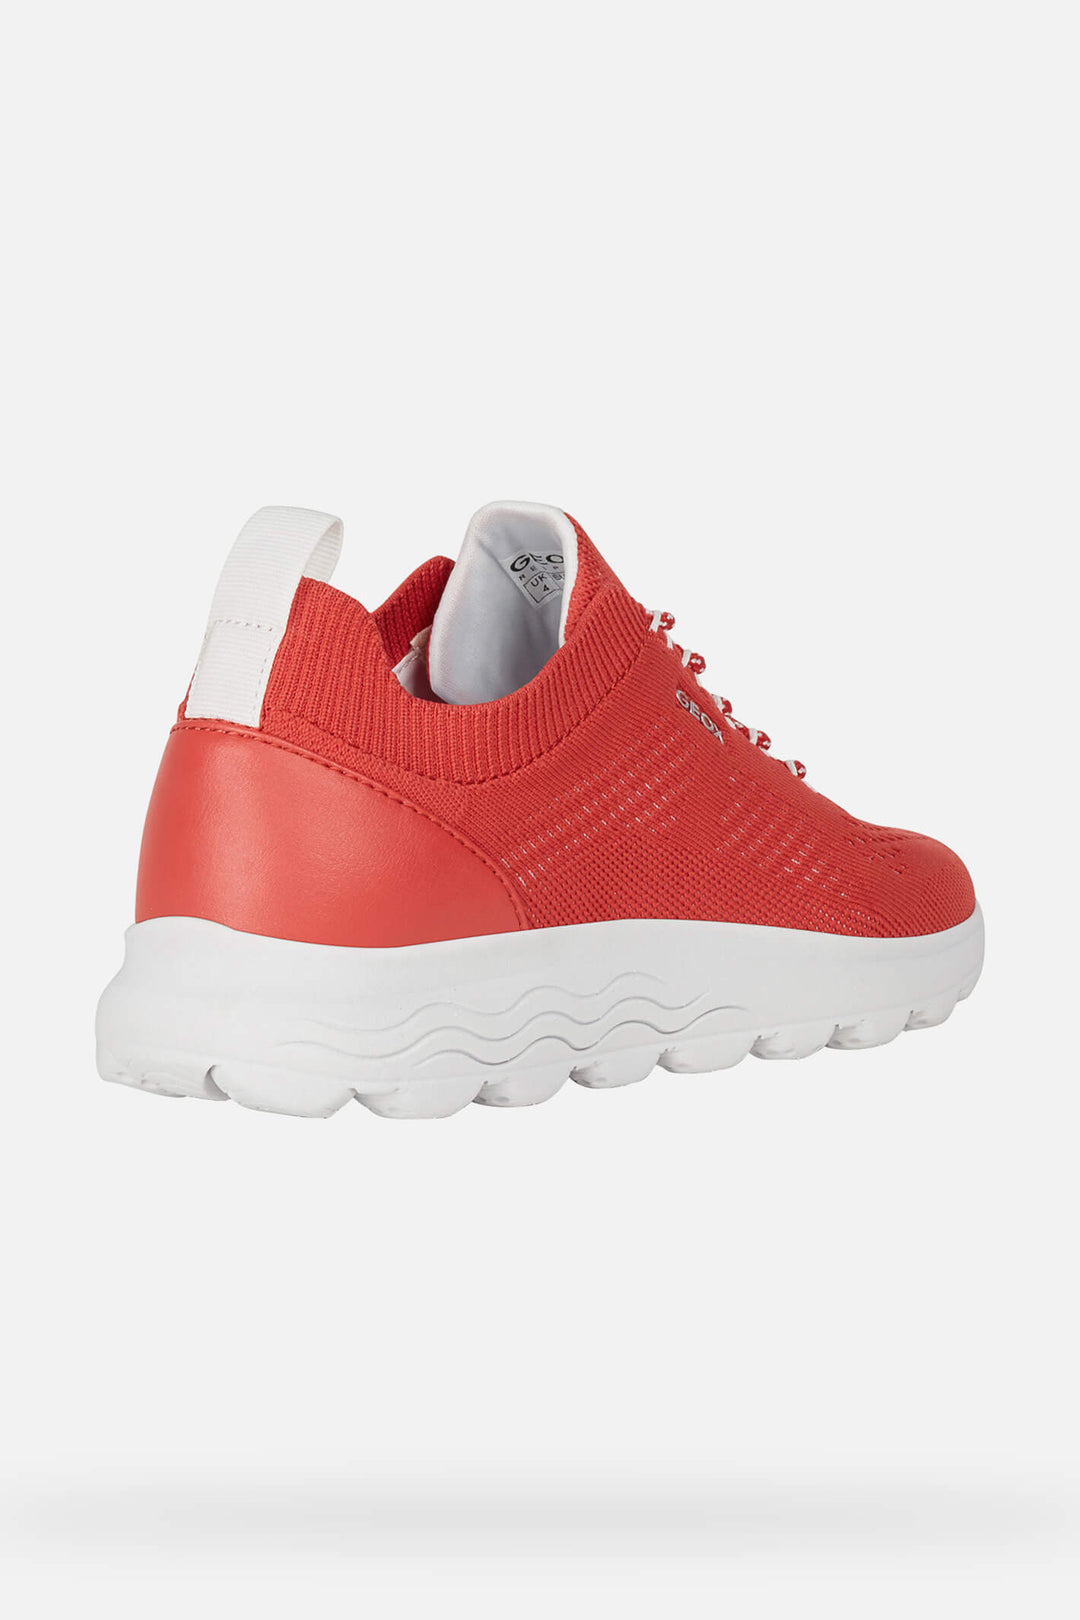 Geox Spherica D15NUA0006KC7000 Knitted Red Trainer - Shirley Allum Boutique